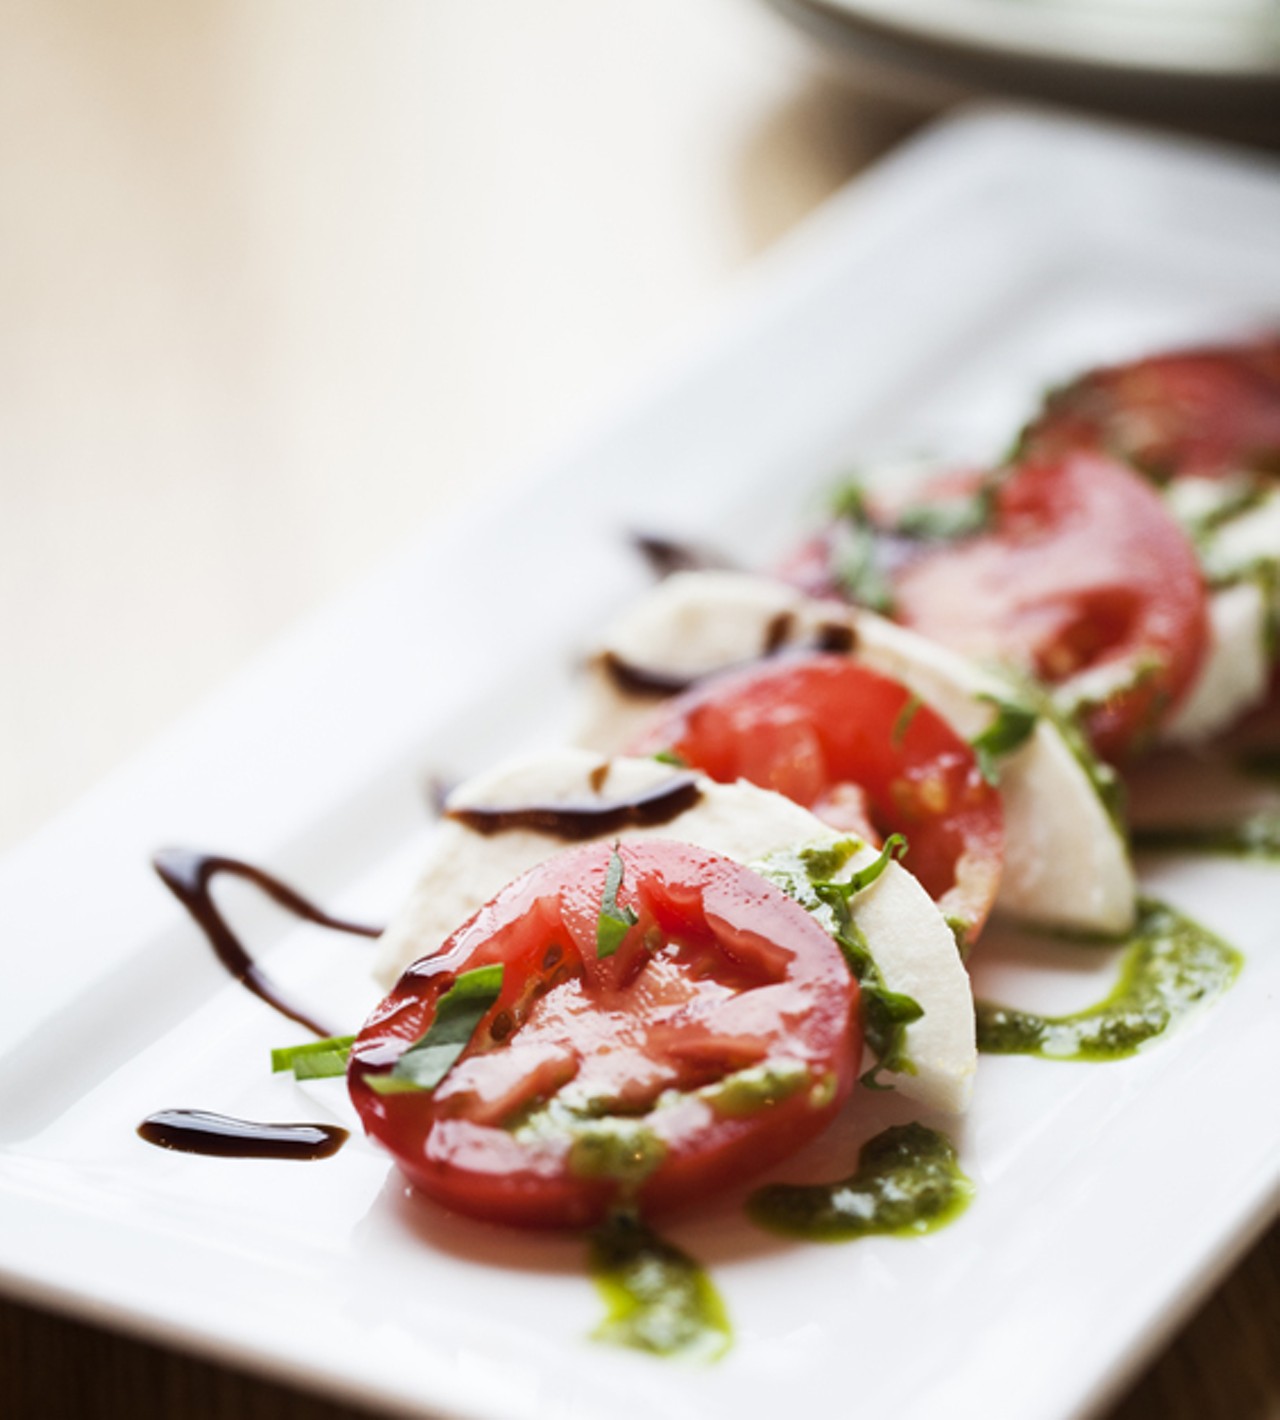 Fresh Mozzarella is served with tomato, basil pesto and a balsamic reduction.